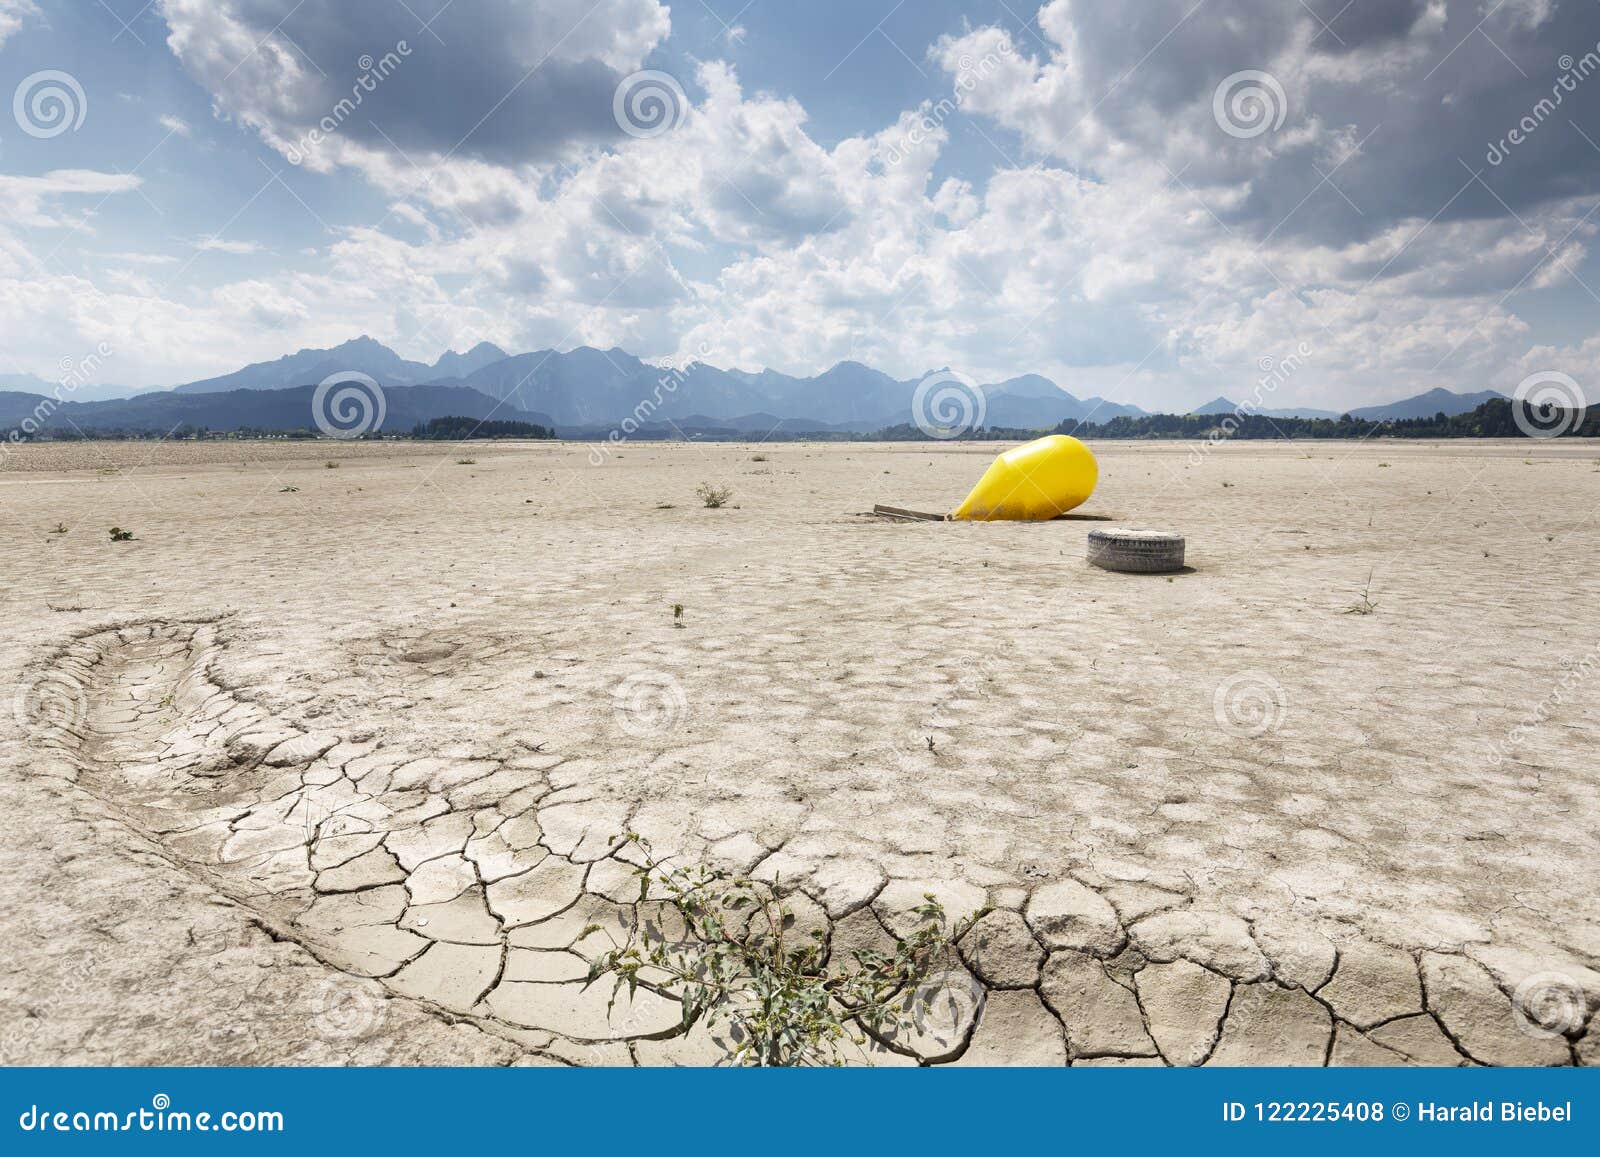 buoy in the waterless forggensee lake in bavaria, germany